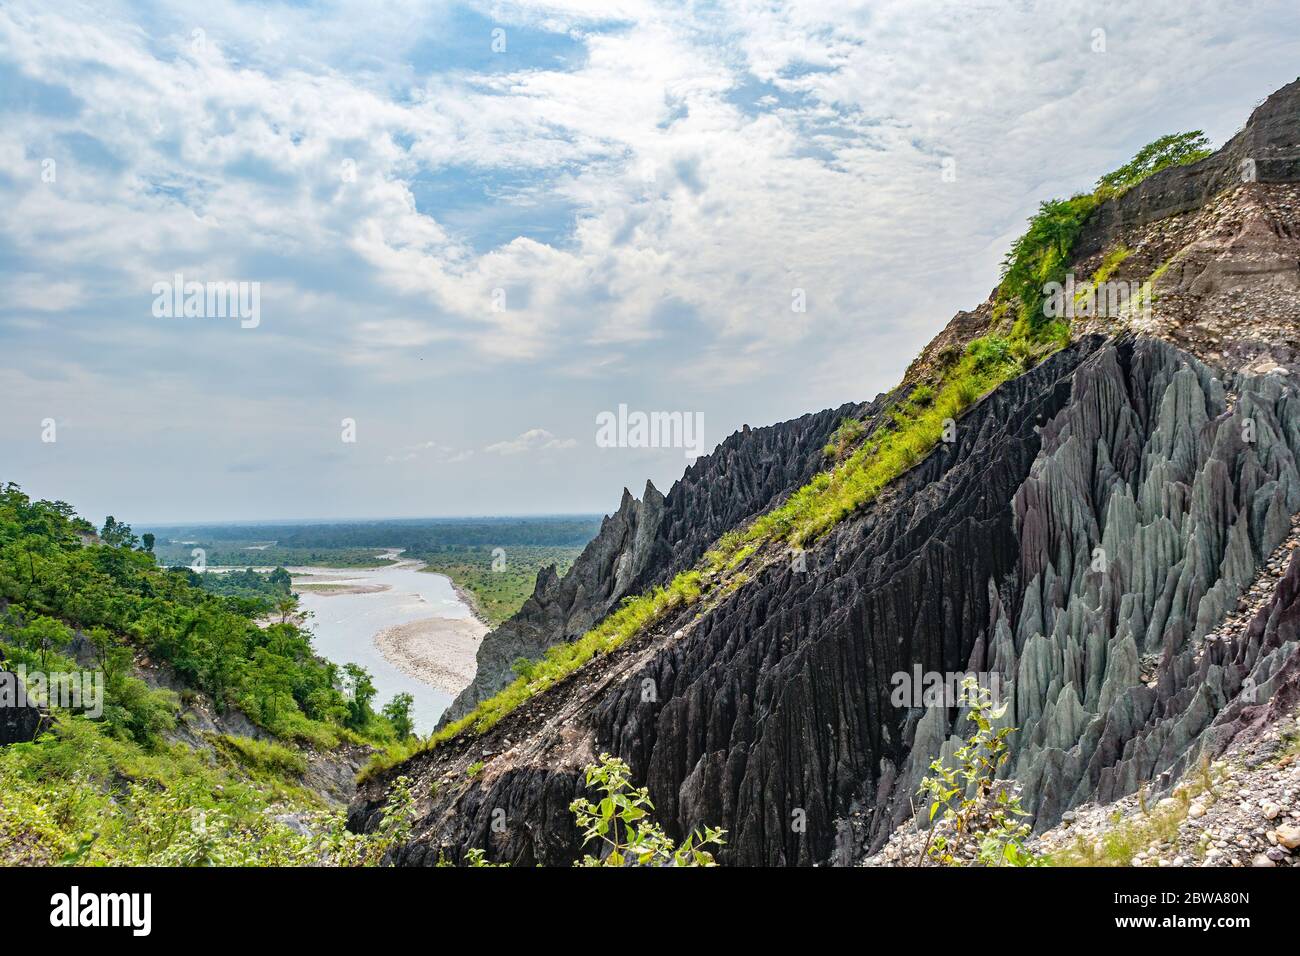 Geological formation due to soil erosion Stock Photo